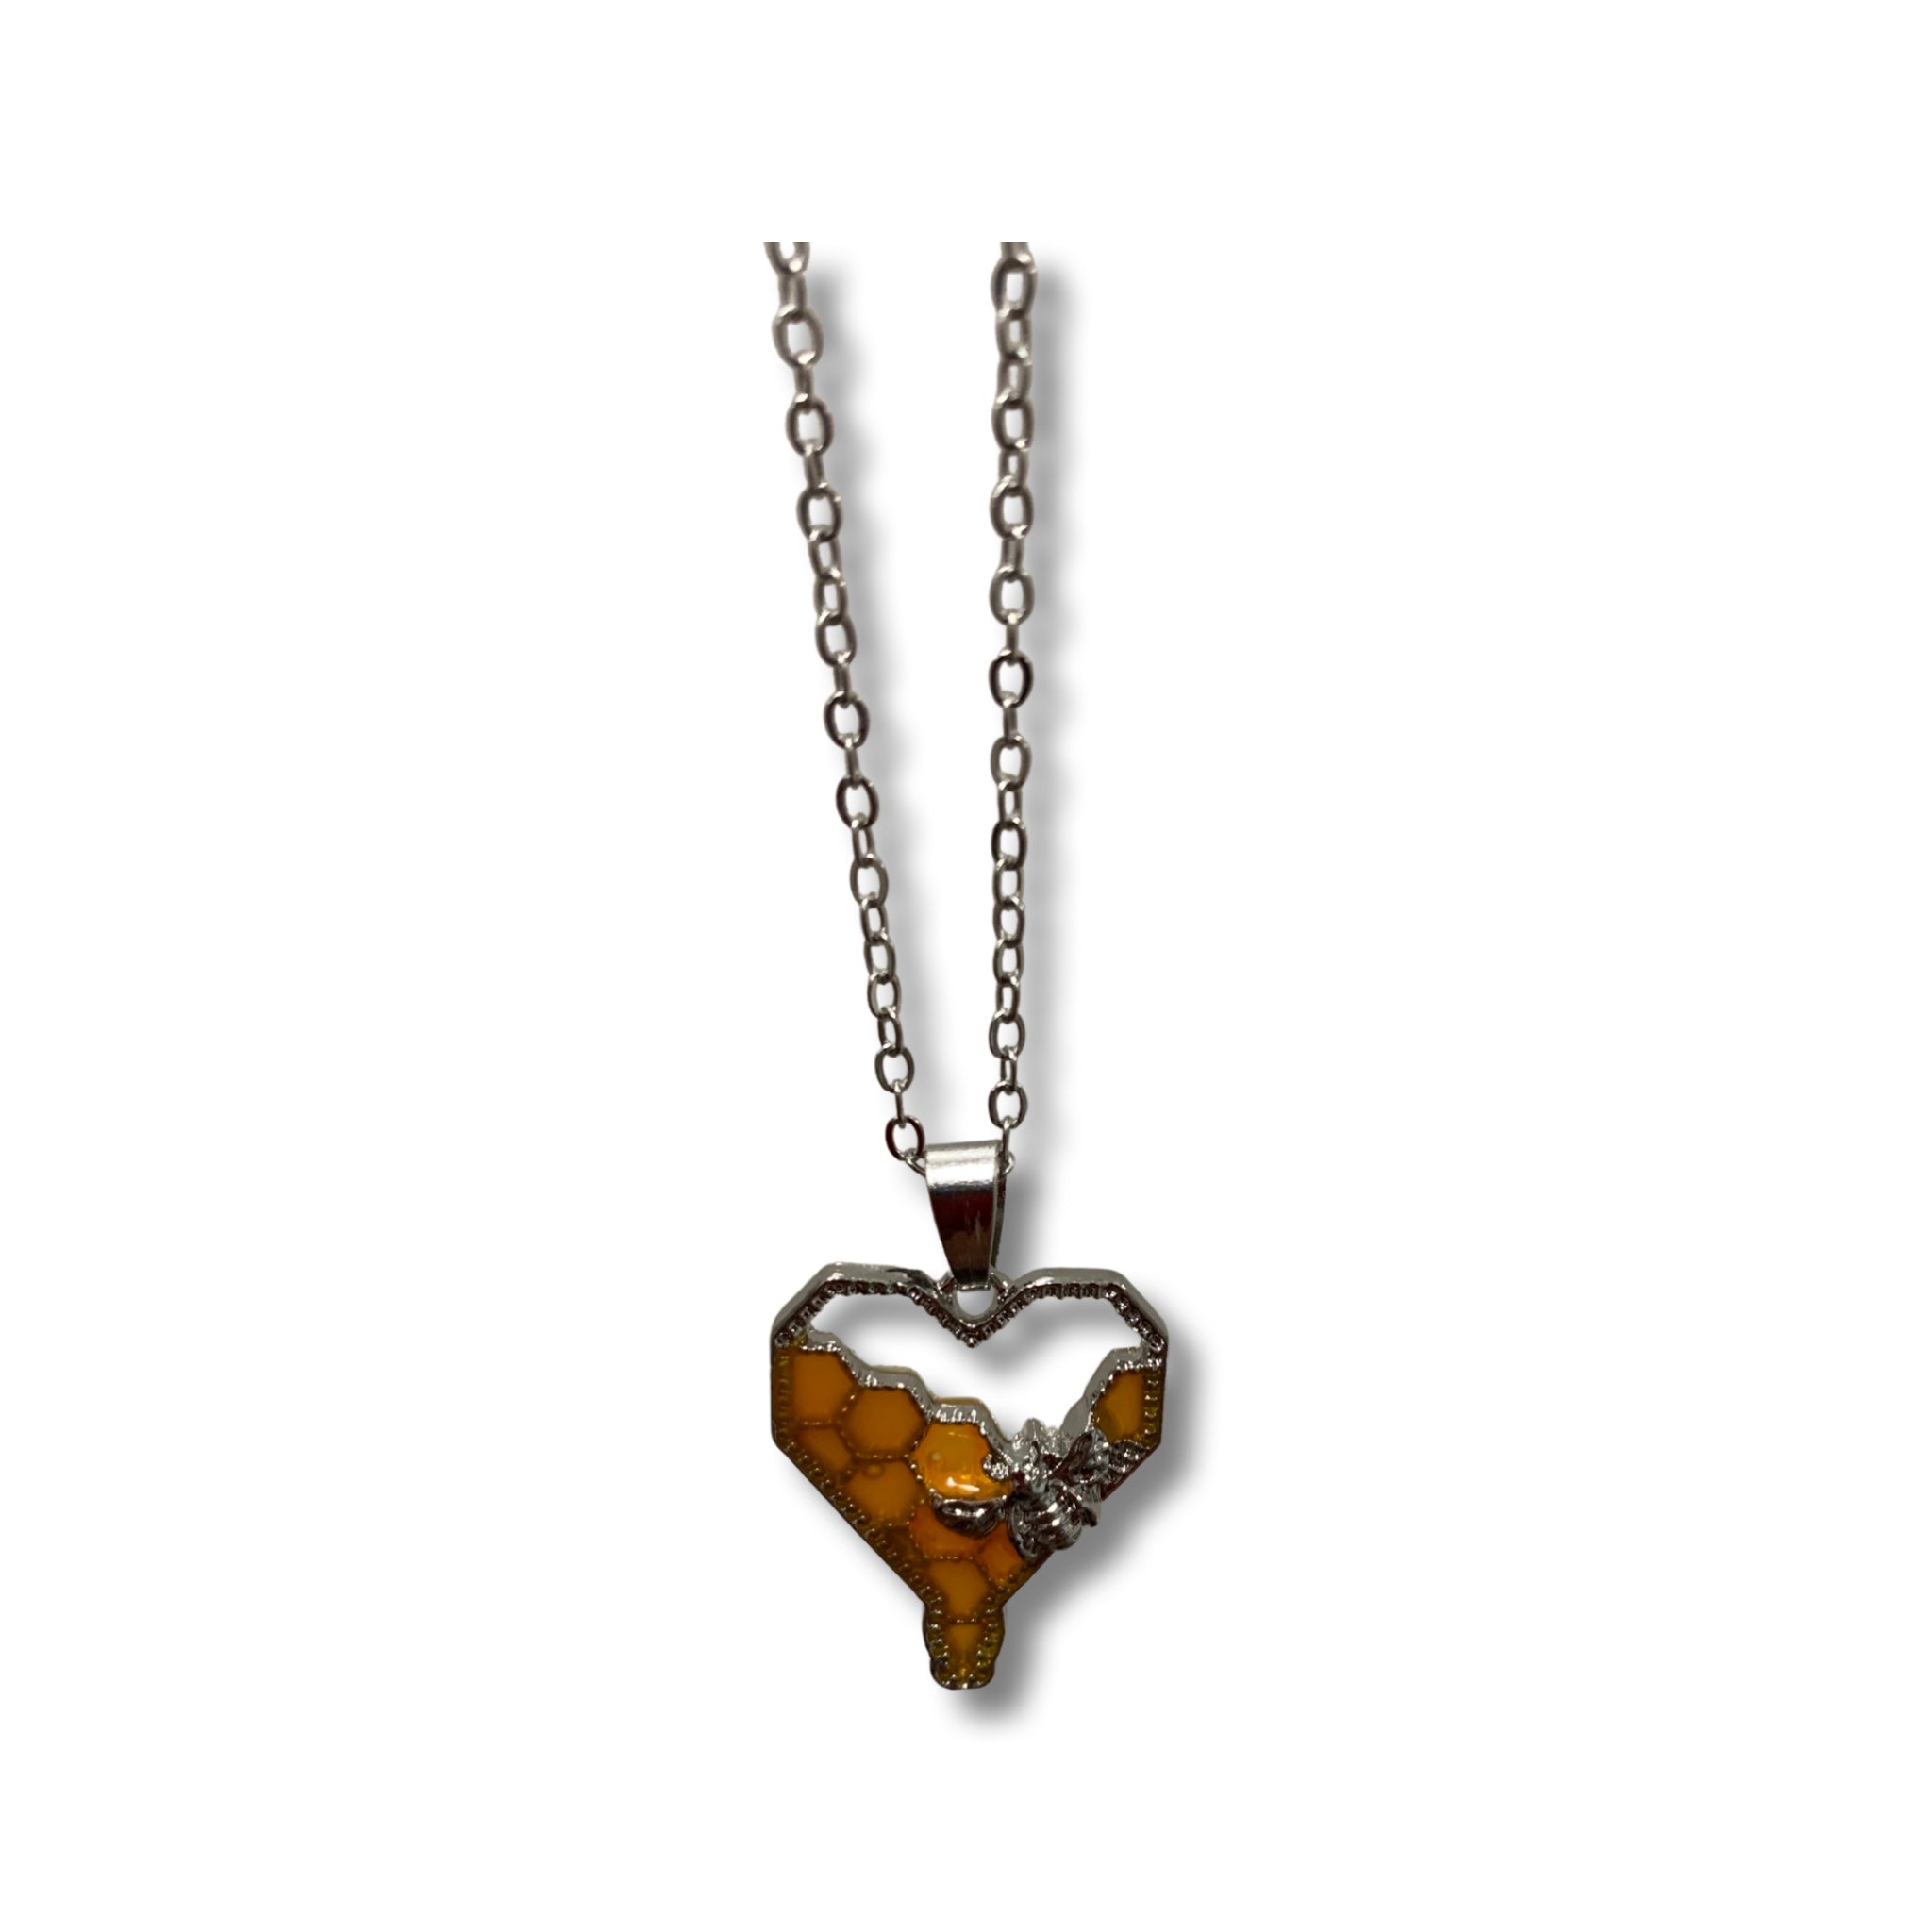 Elegant silver necklace with a heart-shaped honeycomb pendant.